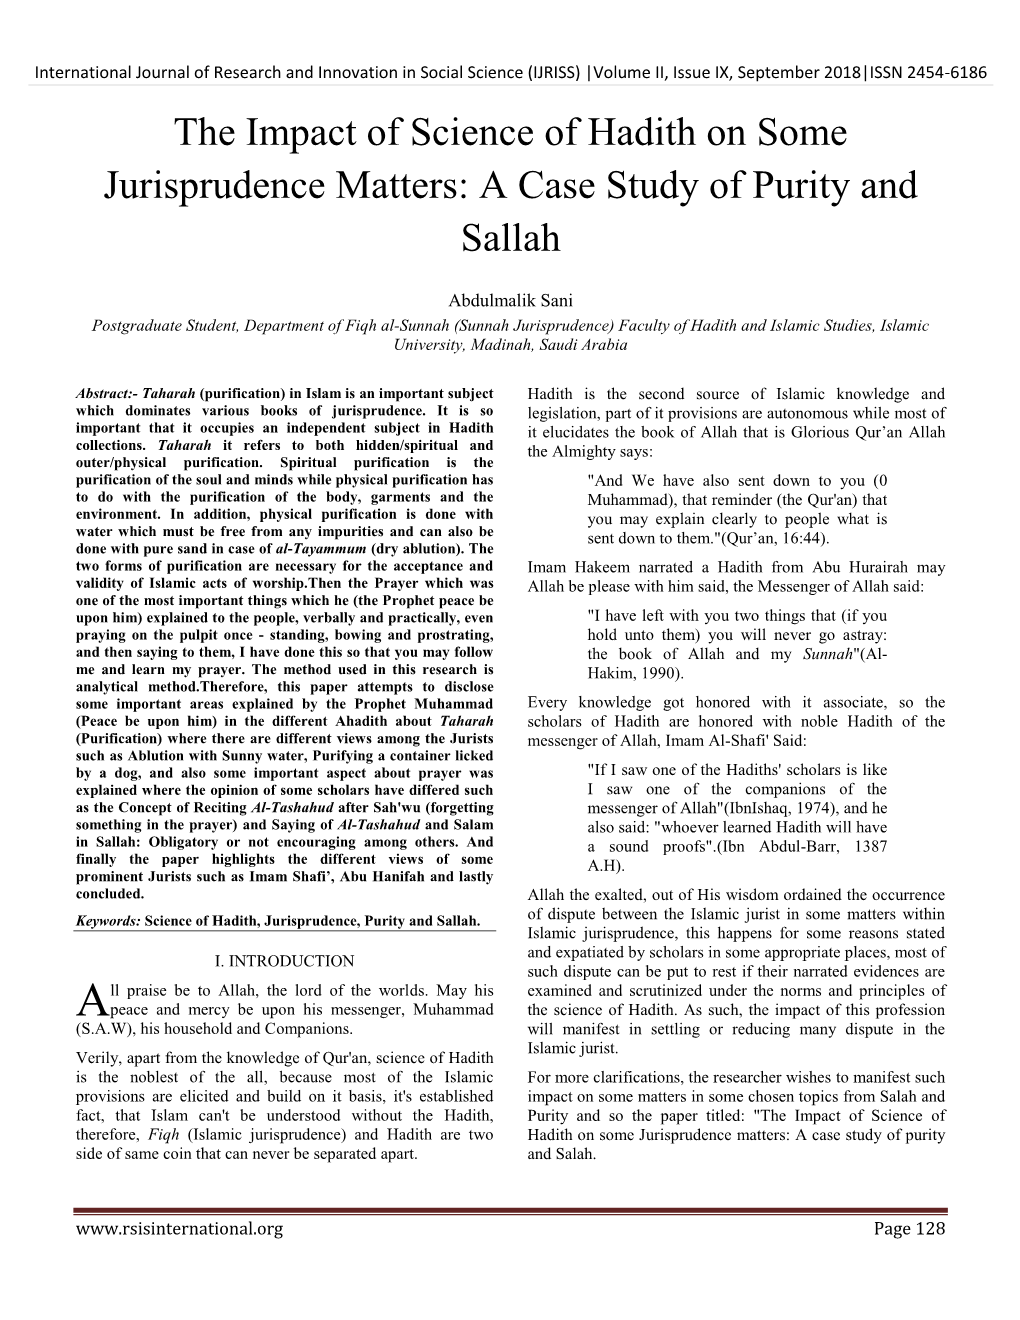 The Impact of Science of Hadith on Some Jurisprudence Matters: a Case Study of Purity and Sallah